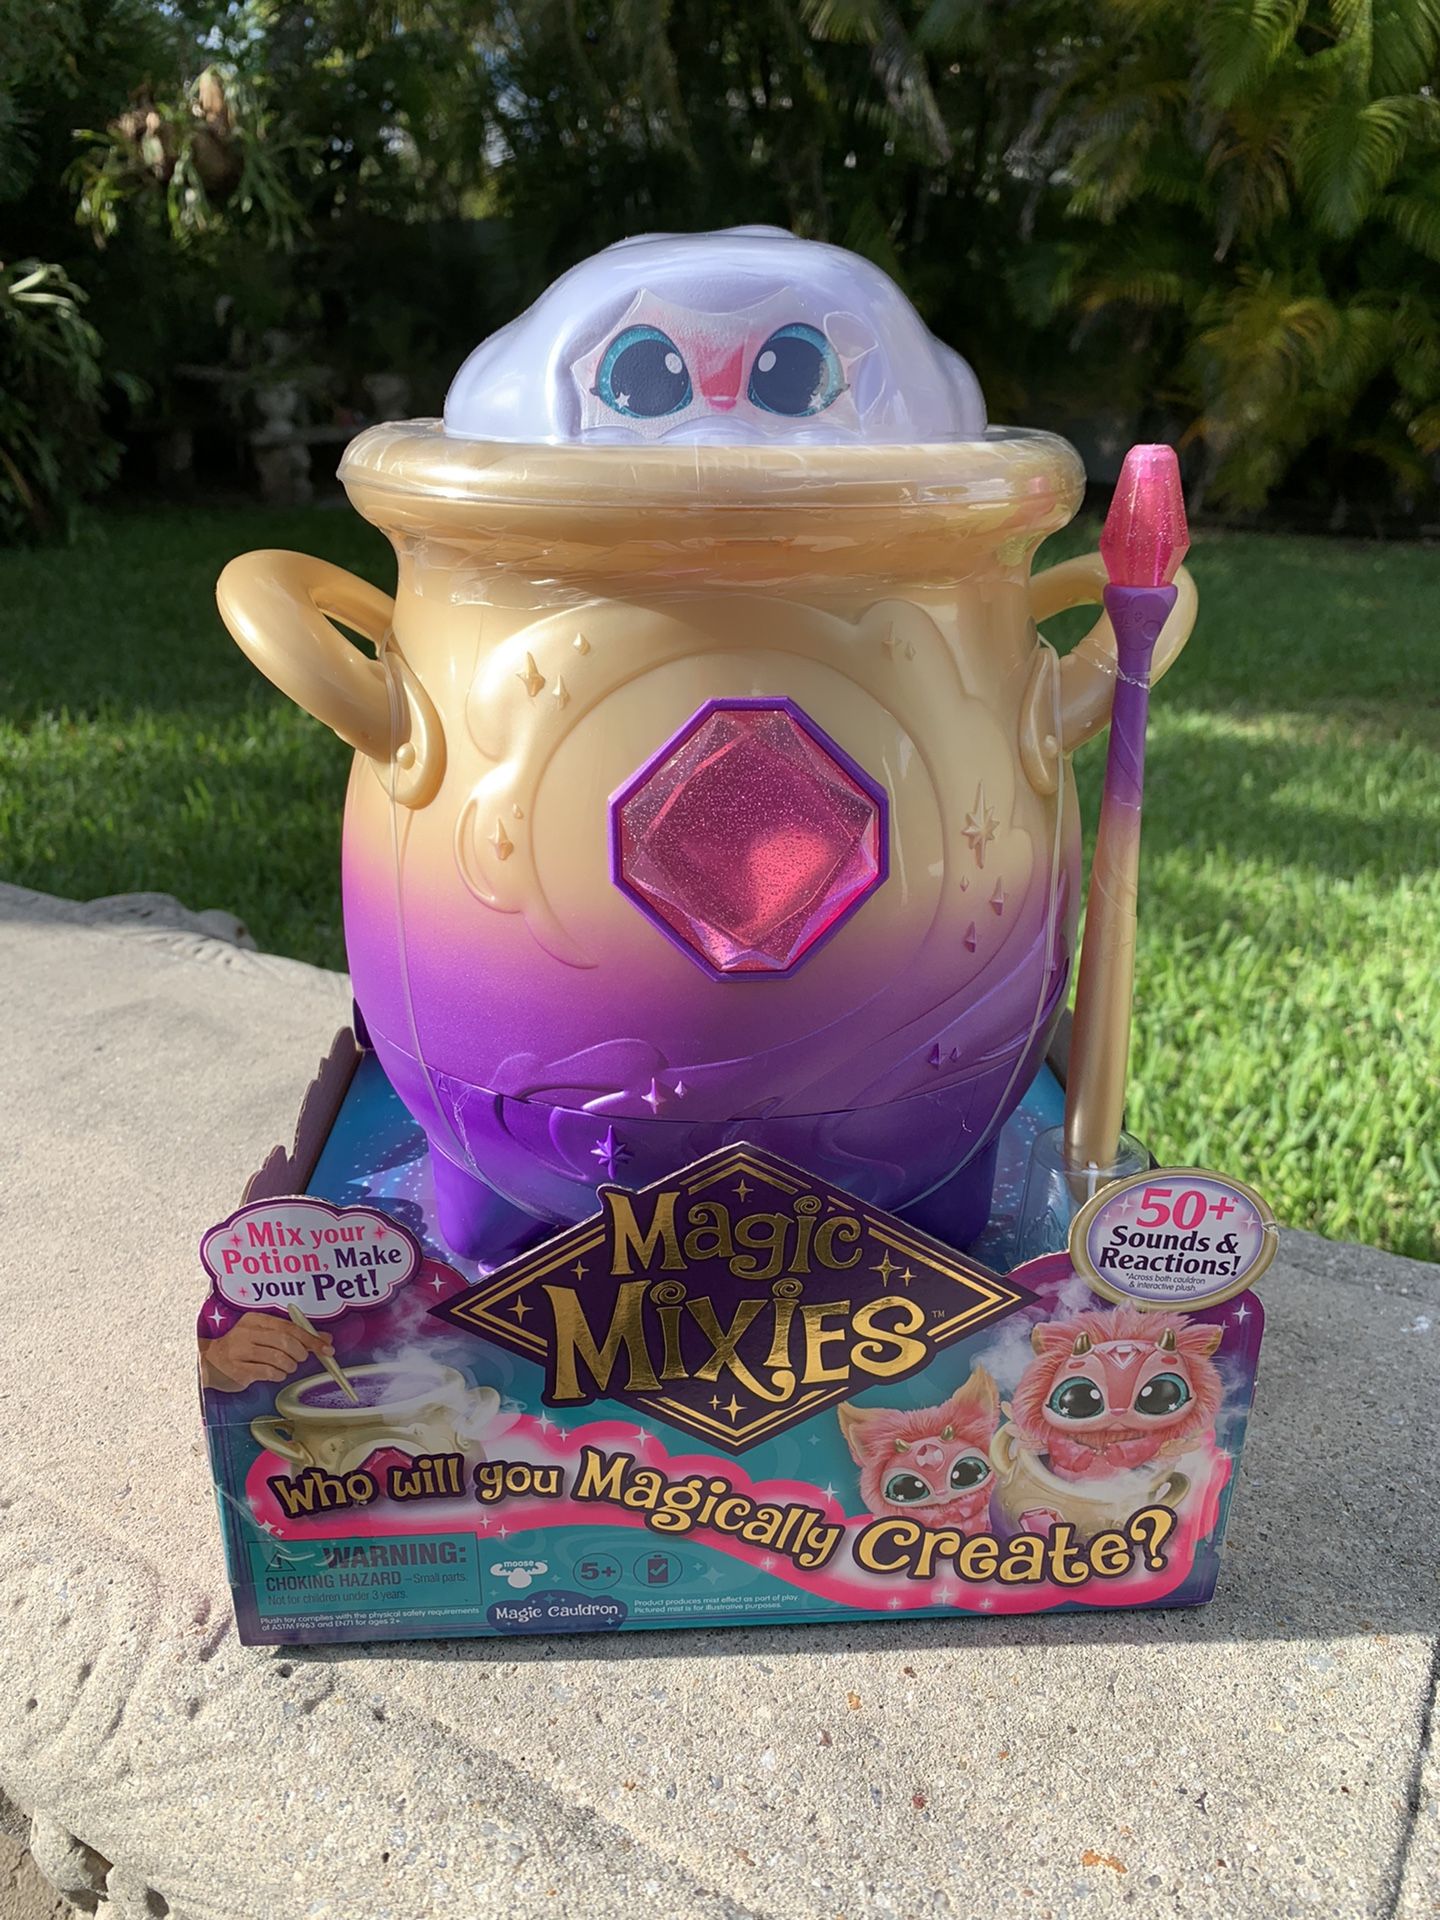 Magic Mixies Magical Misting Cauldron Interactive 8" Plush Toy, Pink. New in Box. Local Pickup in Homestead, Florida.